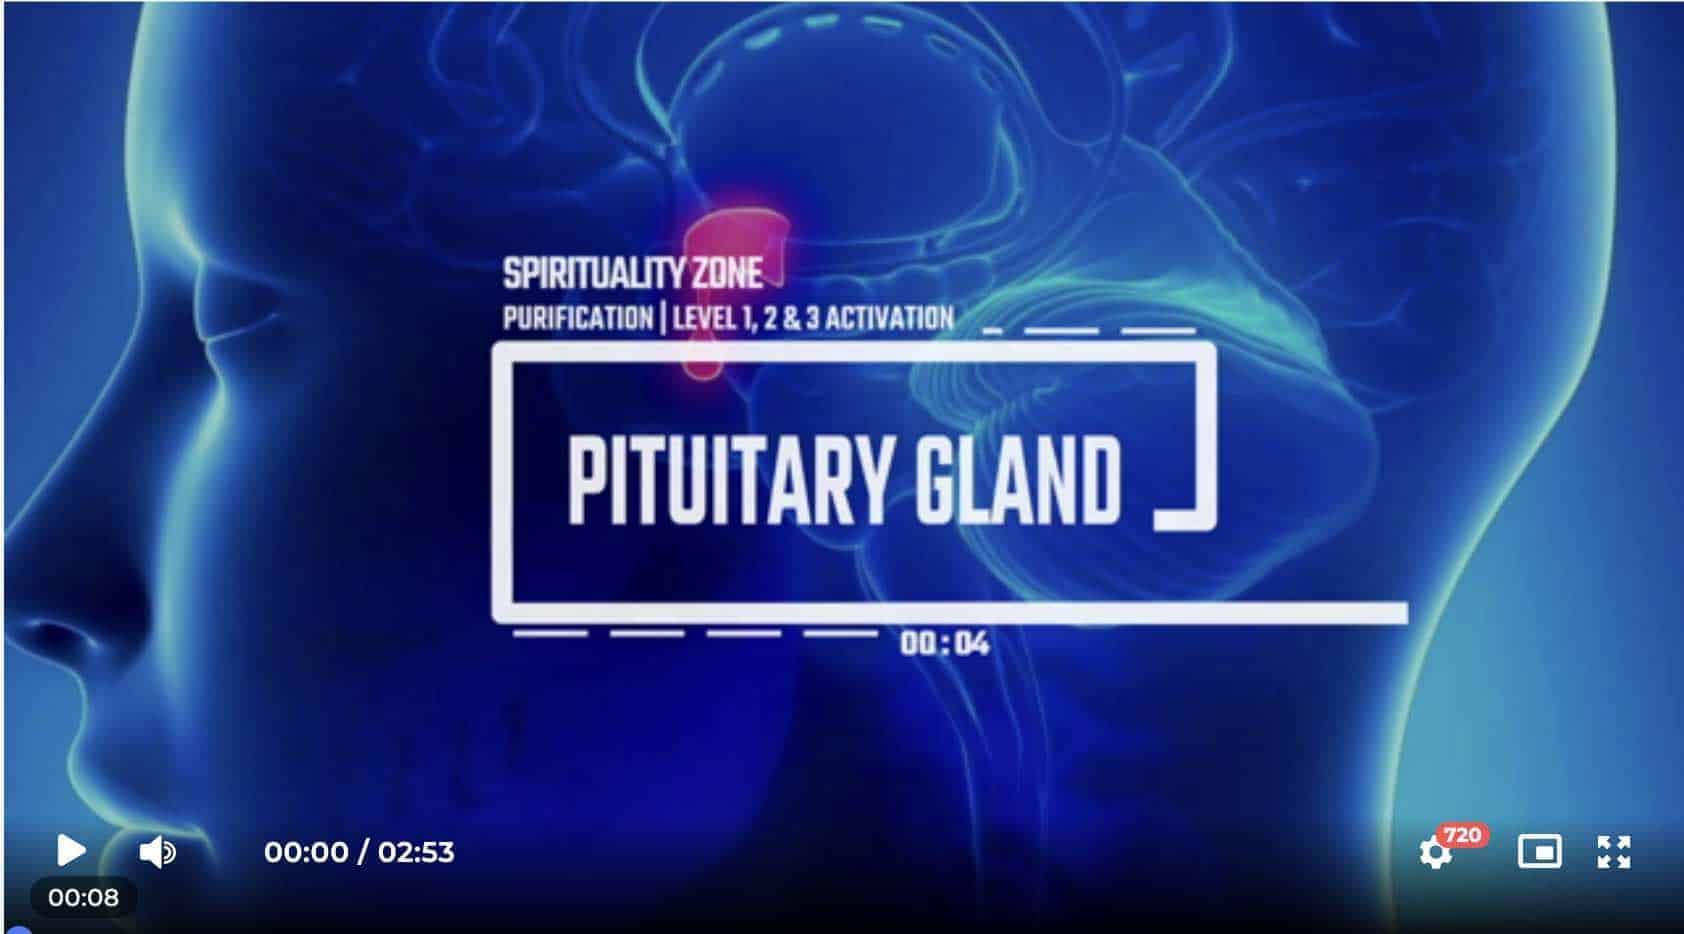 Pituitary Gland Purification + Level 1, 2 & 3 Activation